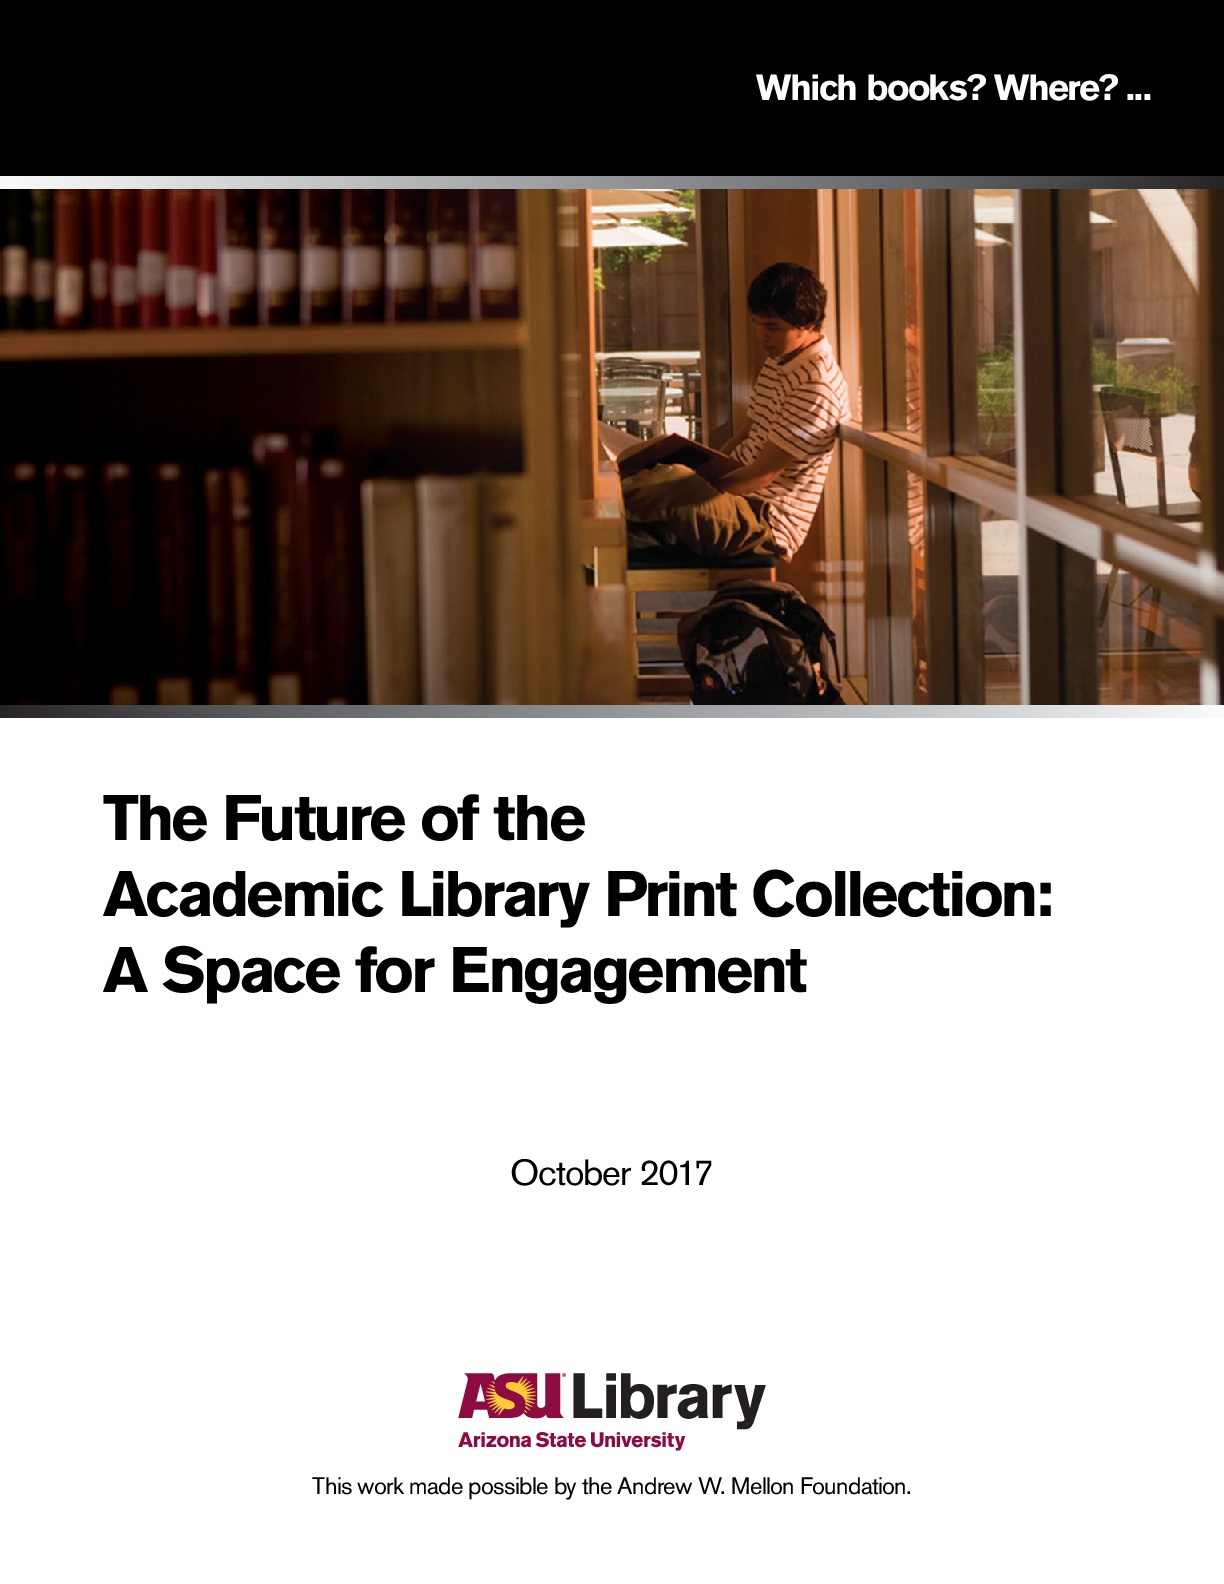 The Future of the Academic Library Print Collection: A Space for Engagement